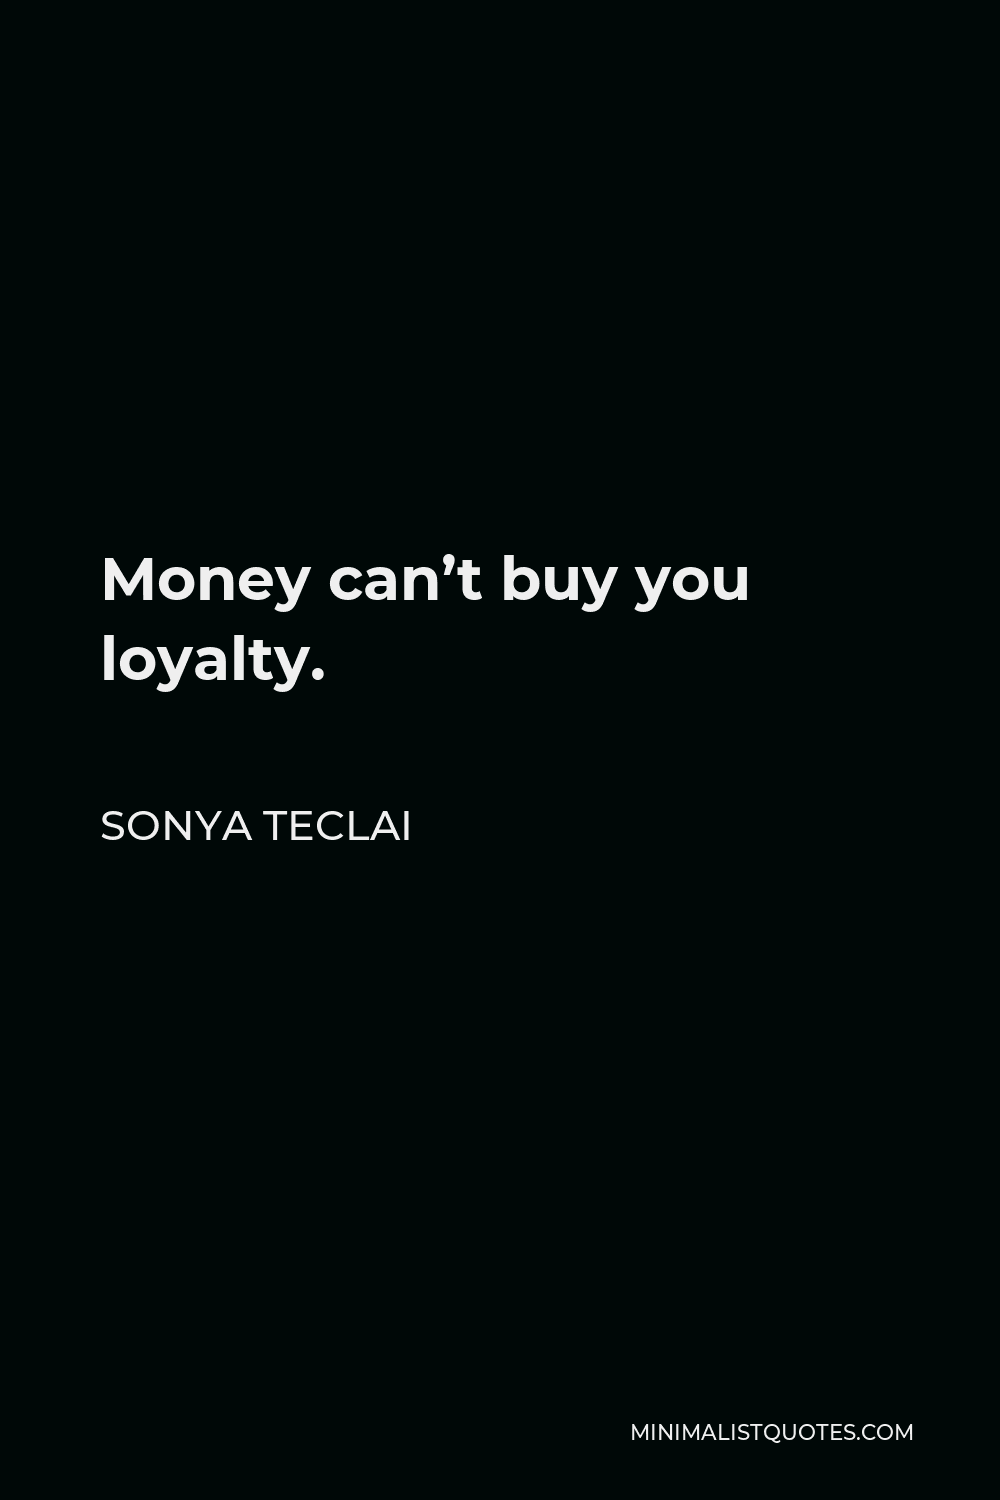 Sonya Teclai Quote - Money can’t buy you loyalty.